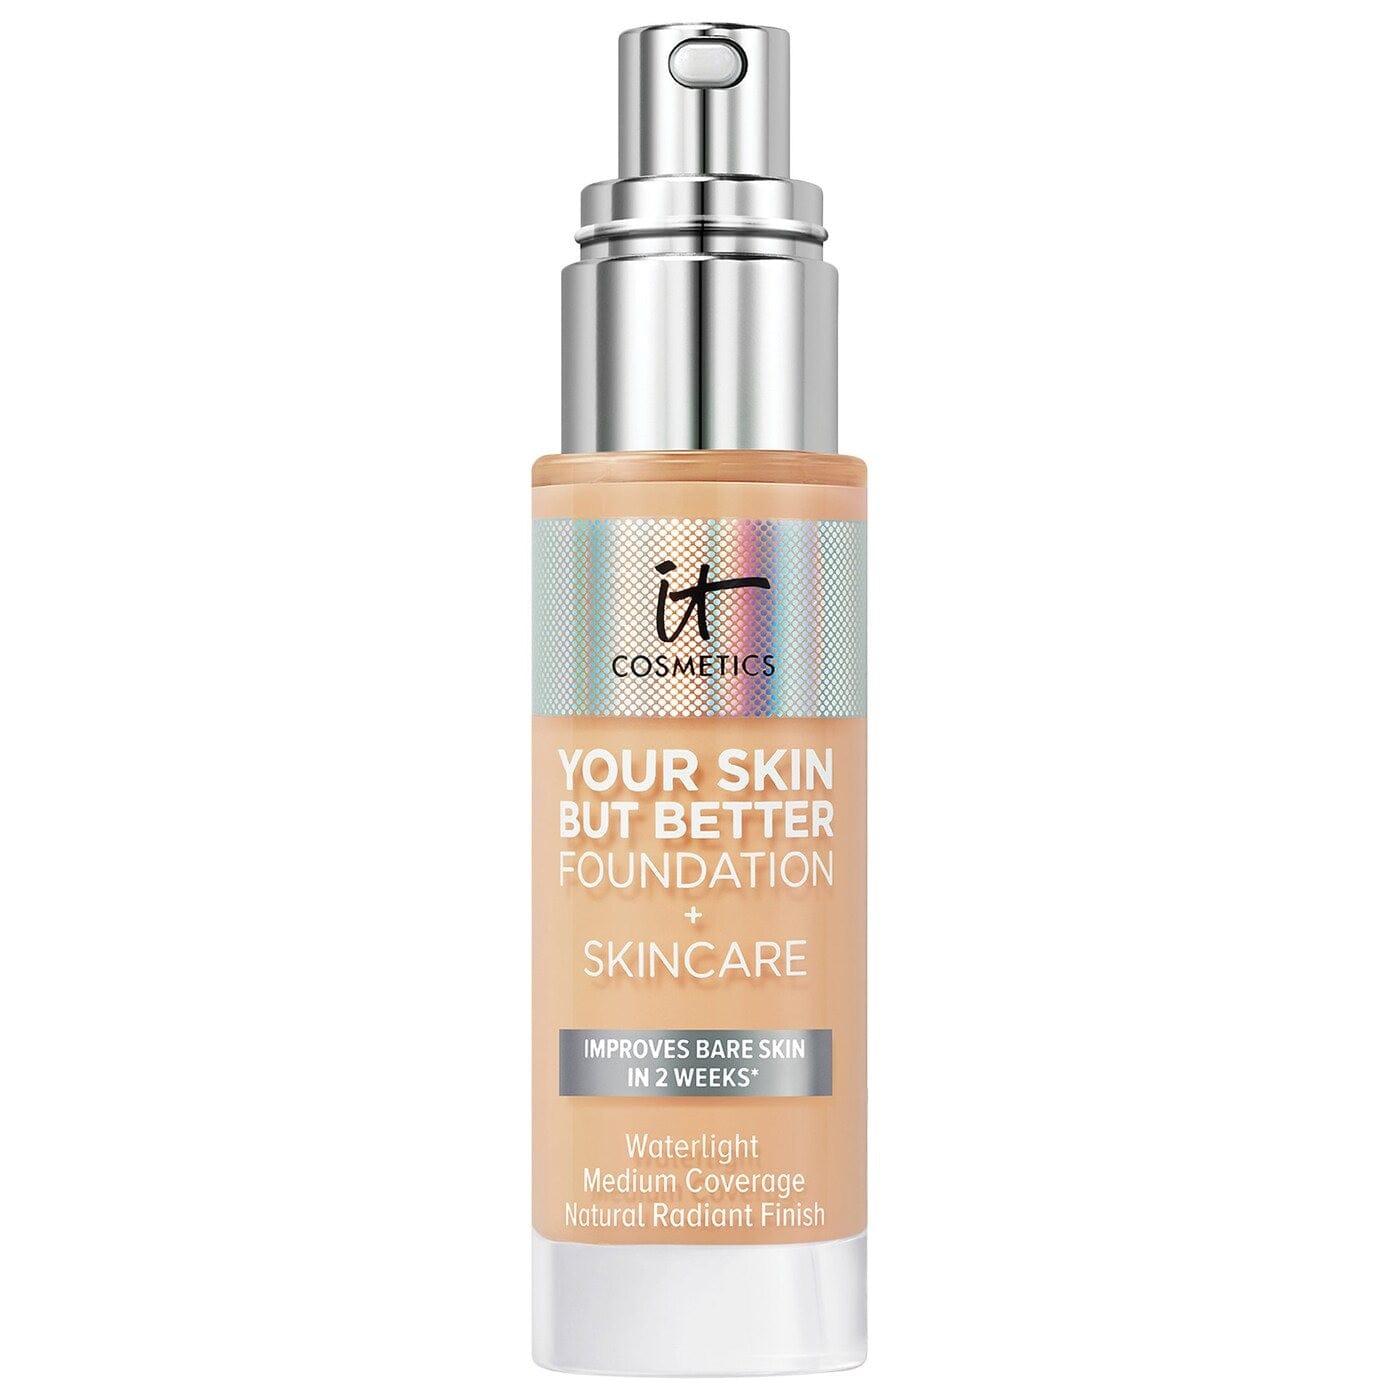 IT COSMETICS Beauty IT Cosmetics Your Skin But Better Foundation and Skincare 30ml - 23 Light Warm